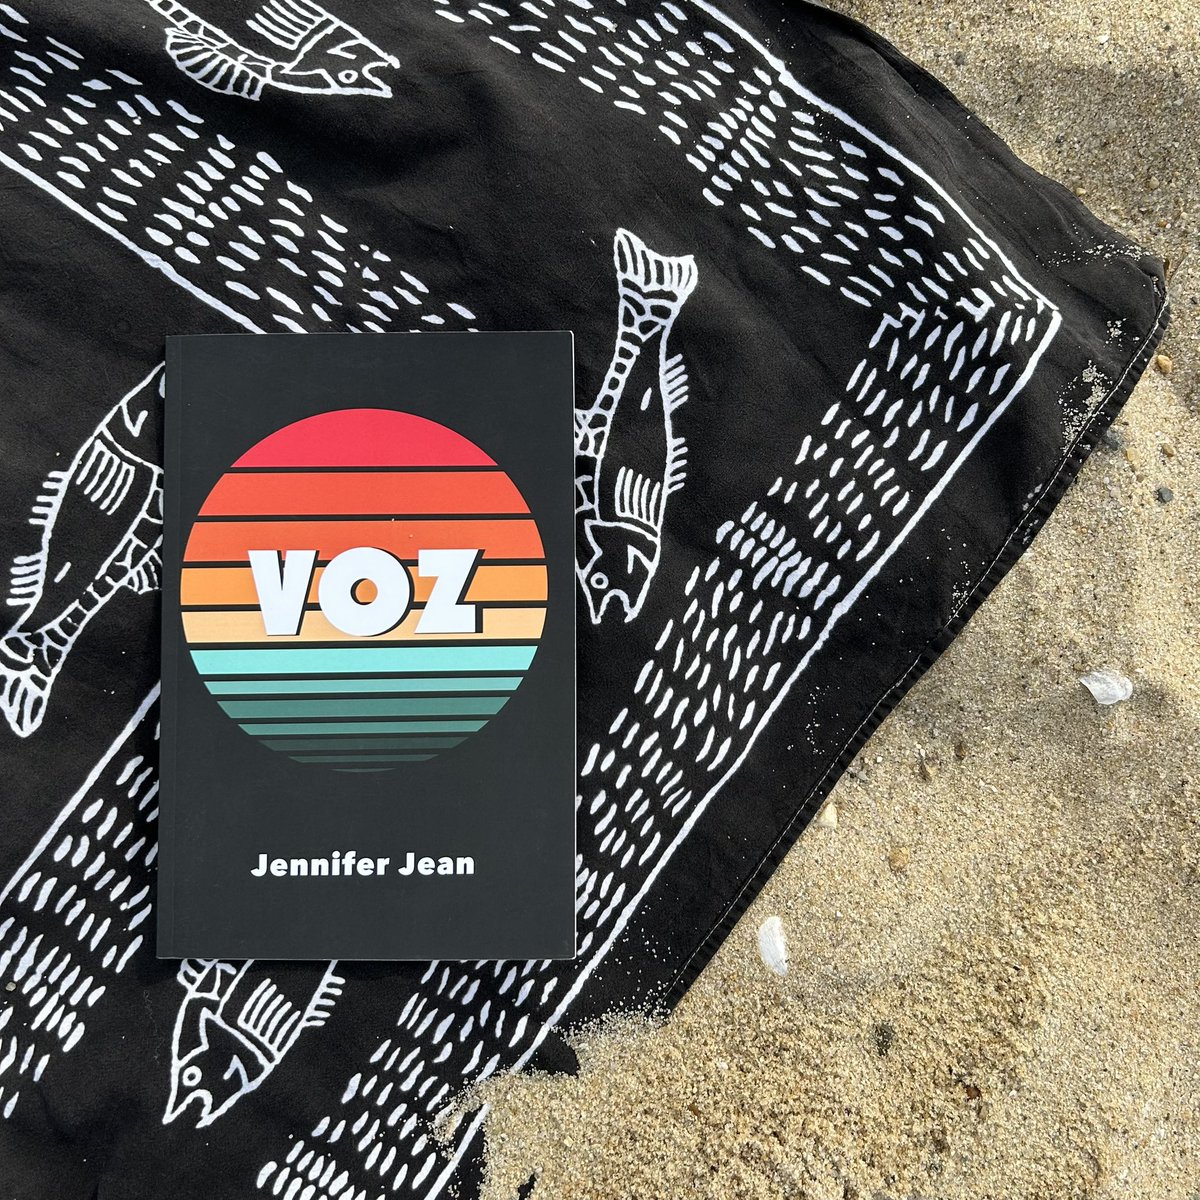 Summer reading: VOZ by Jennifer Jean (Lily Poetry Review Books, 2023), a book of music, California, foster care, the Pacific, family, summer camp, saturation, Disney, dreams, car rides, horses, raging, and singing. ♥️ @fishwifetales @PoetryLily